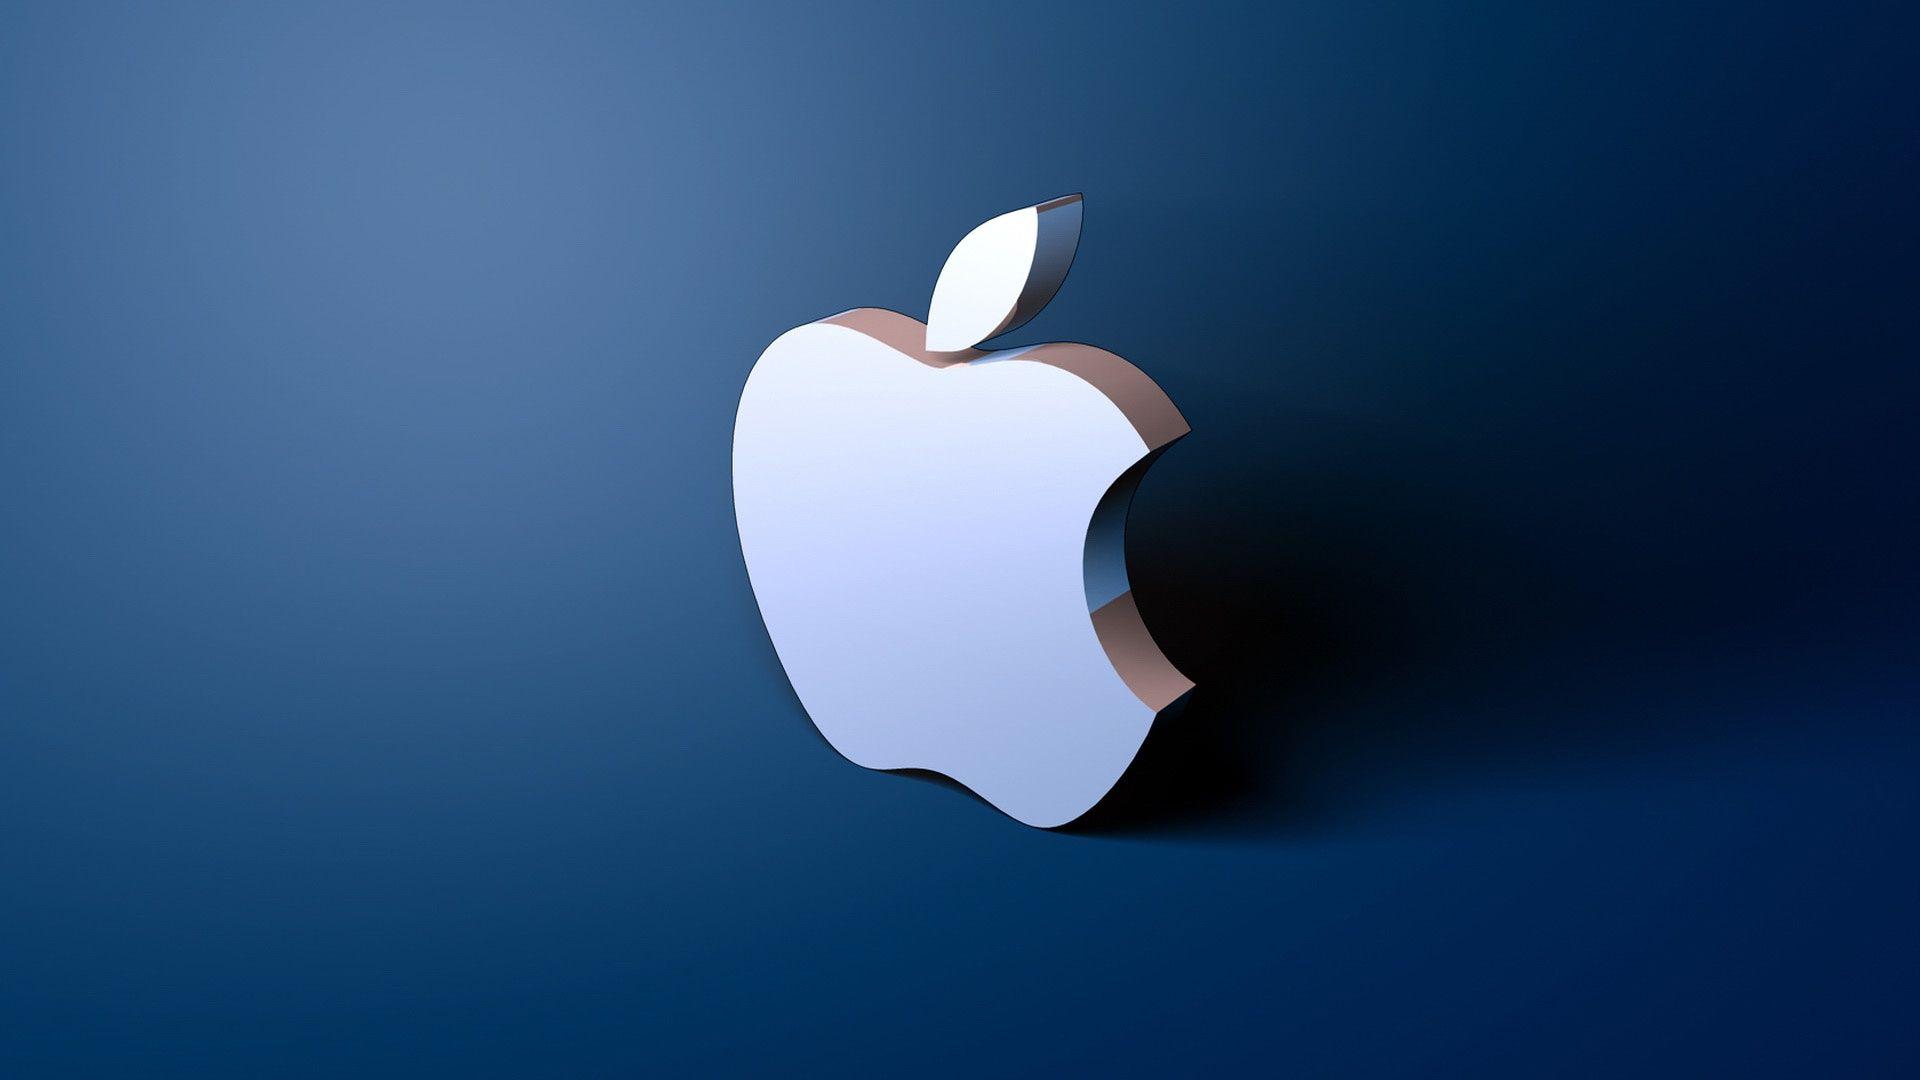 Wallpapers For > Hd Apple Logo Wallpapers